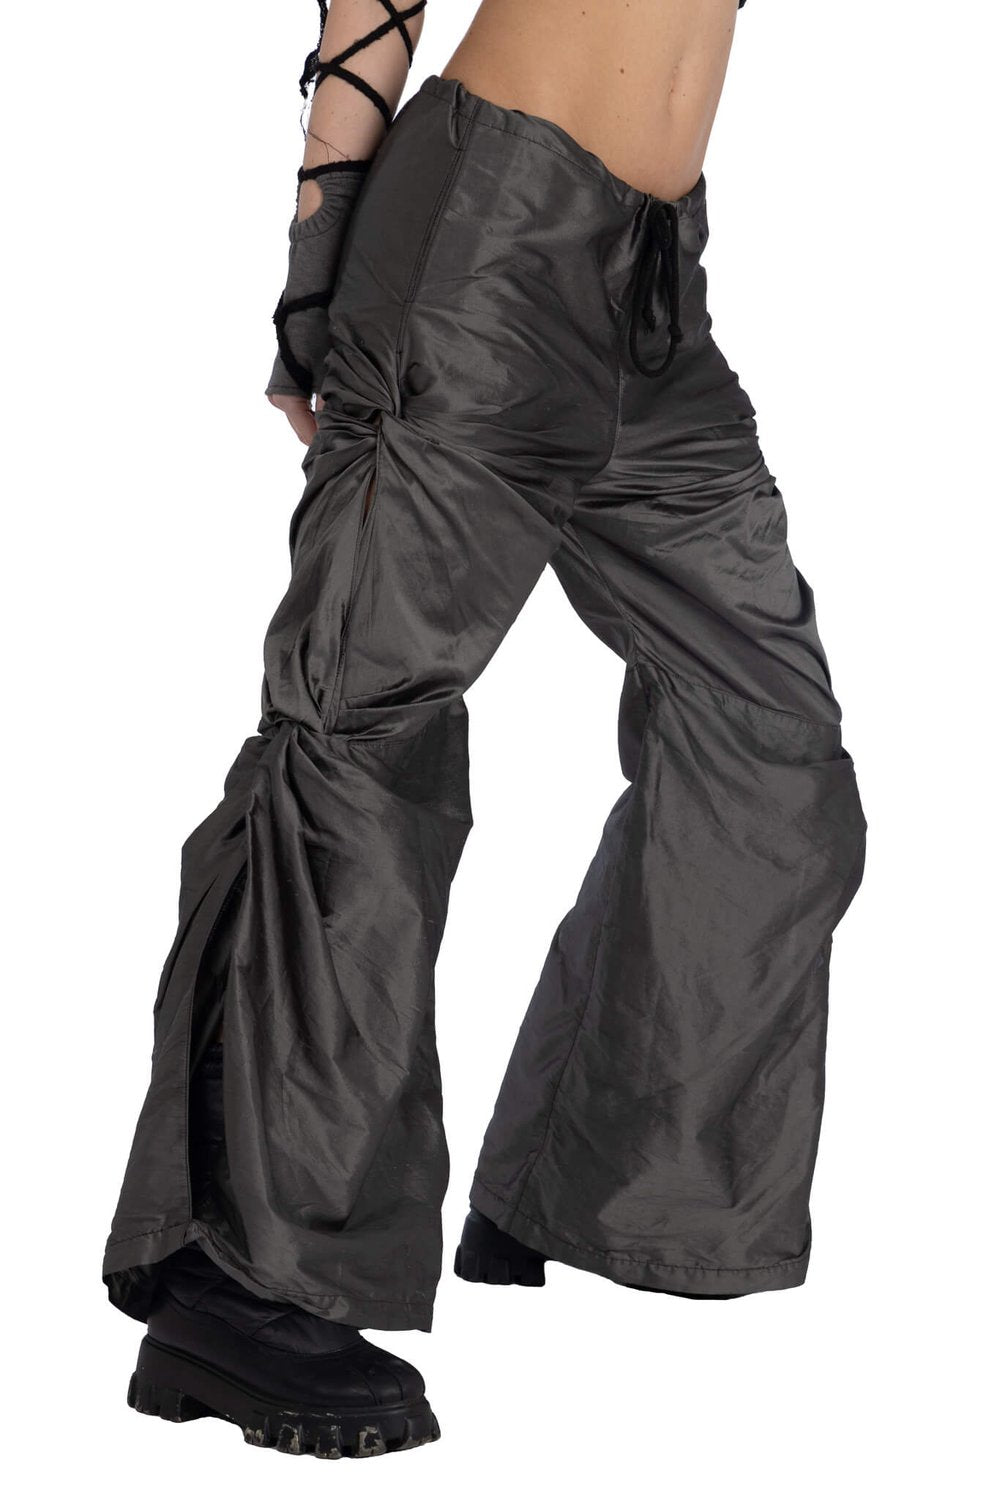 Silk Whirlpool Parachute Pants in Charcoal